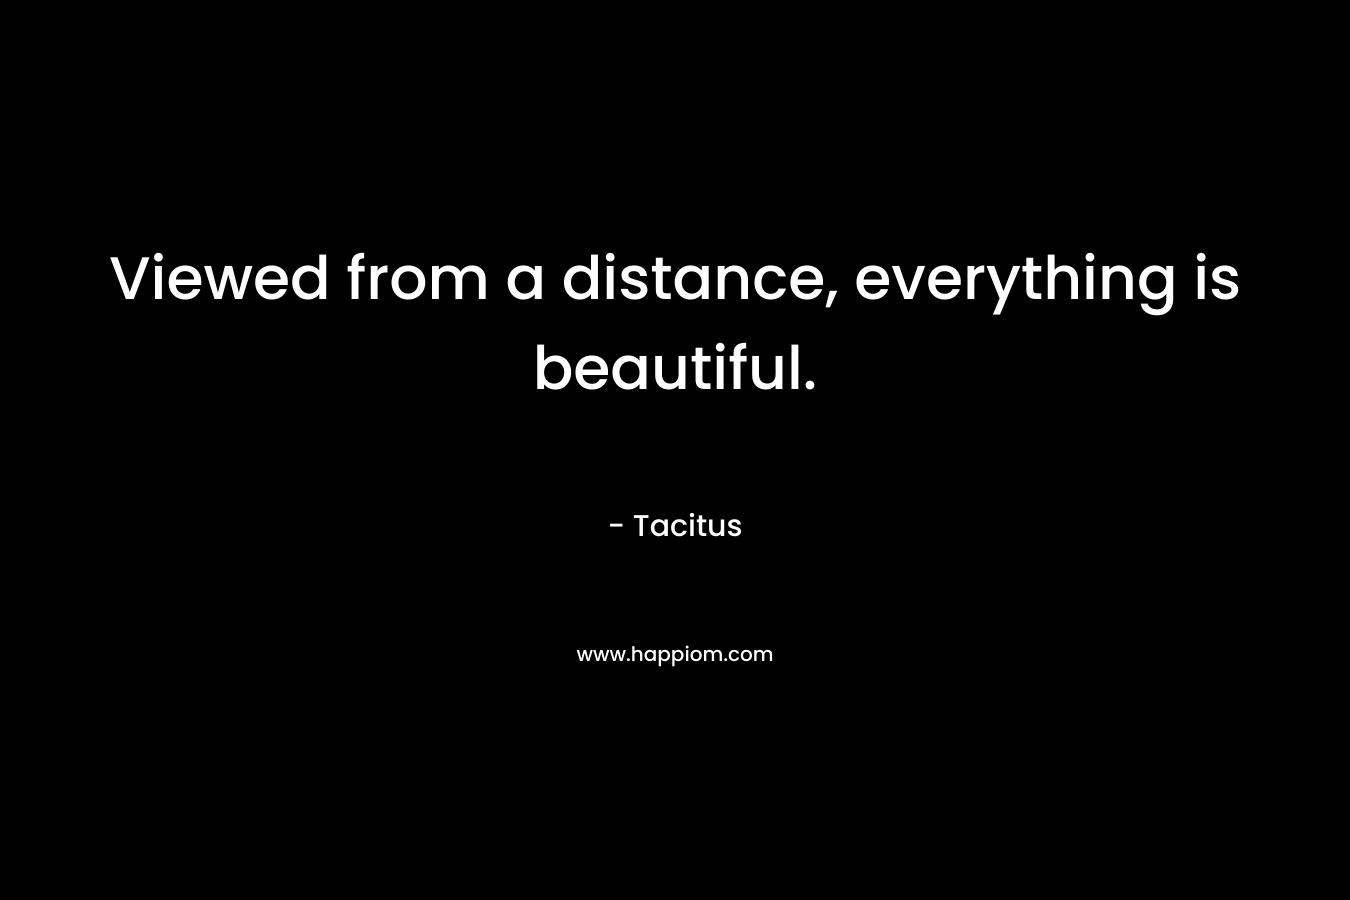 Viewed from a distance, everything is beautiful. – Tacitus